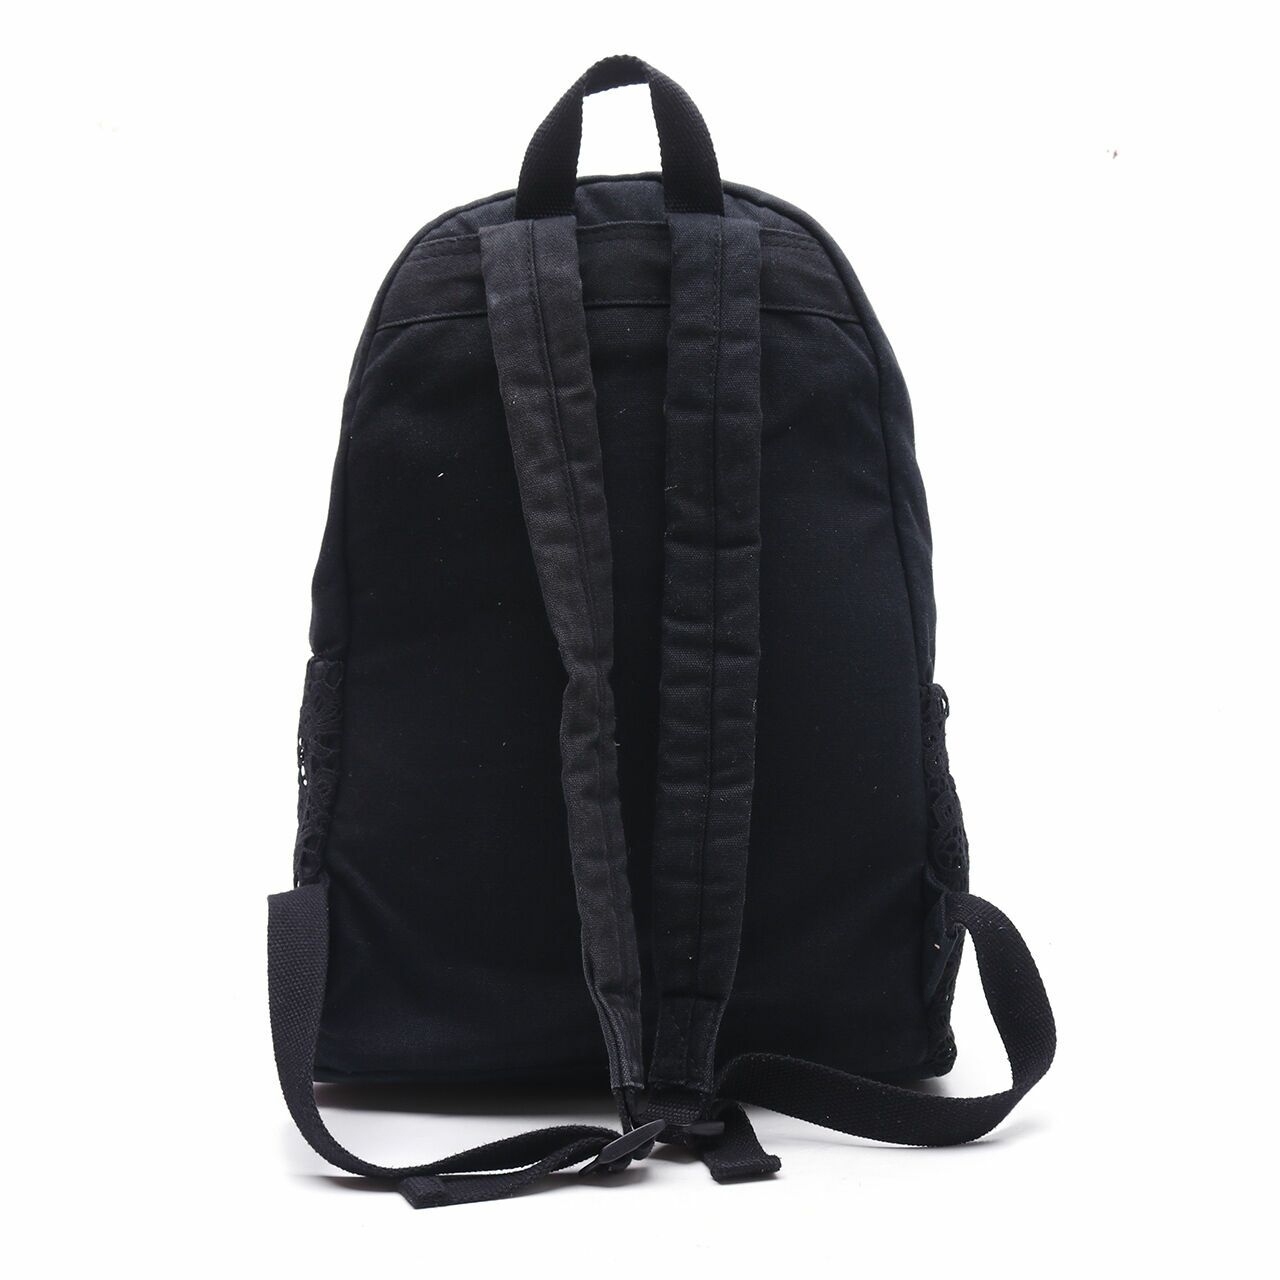 Typo Black Lace Backpack